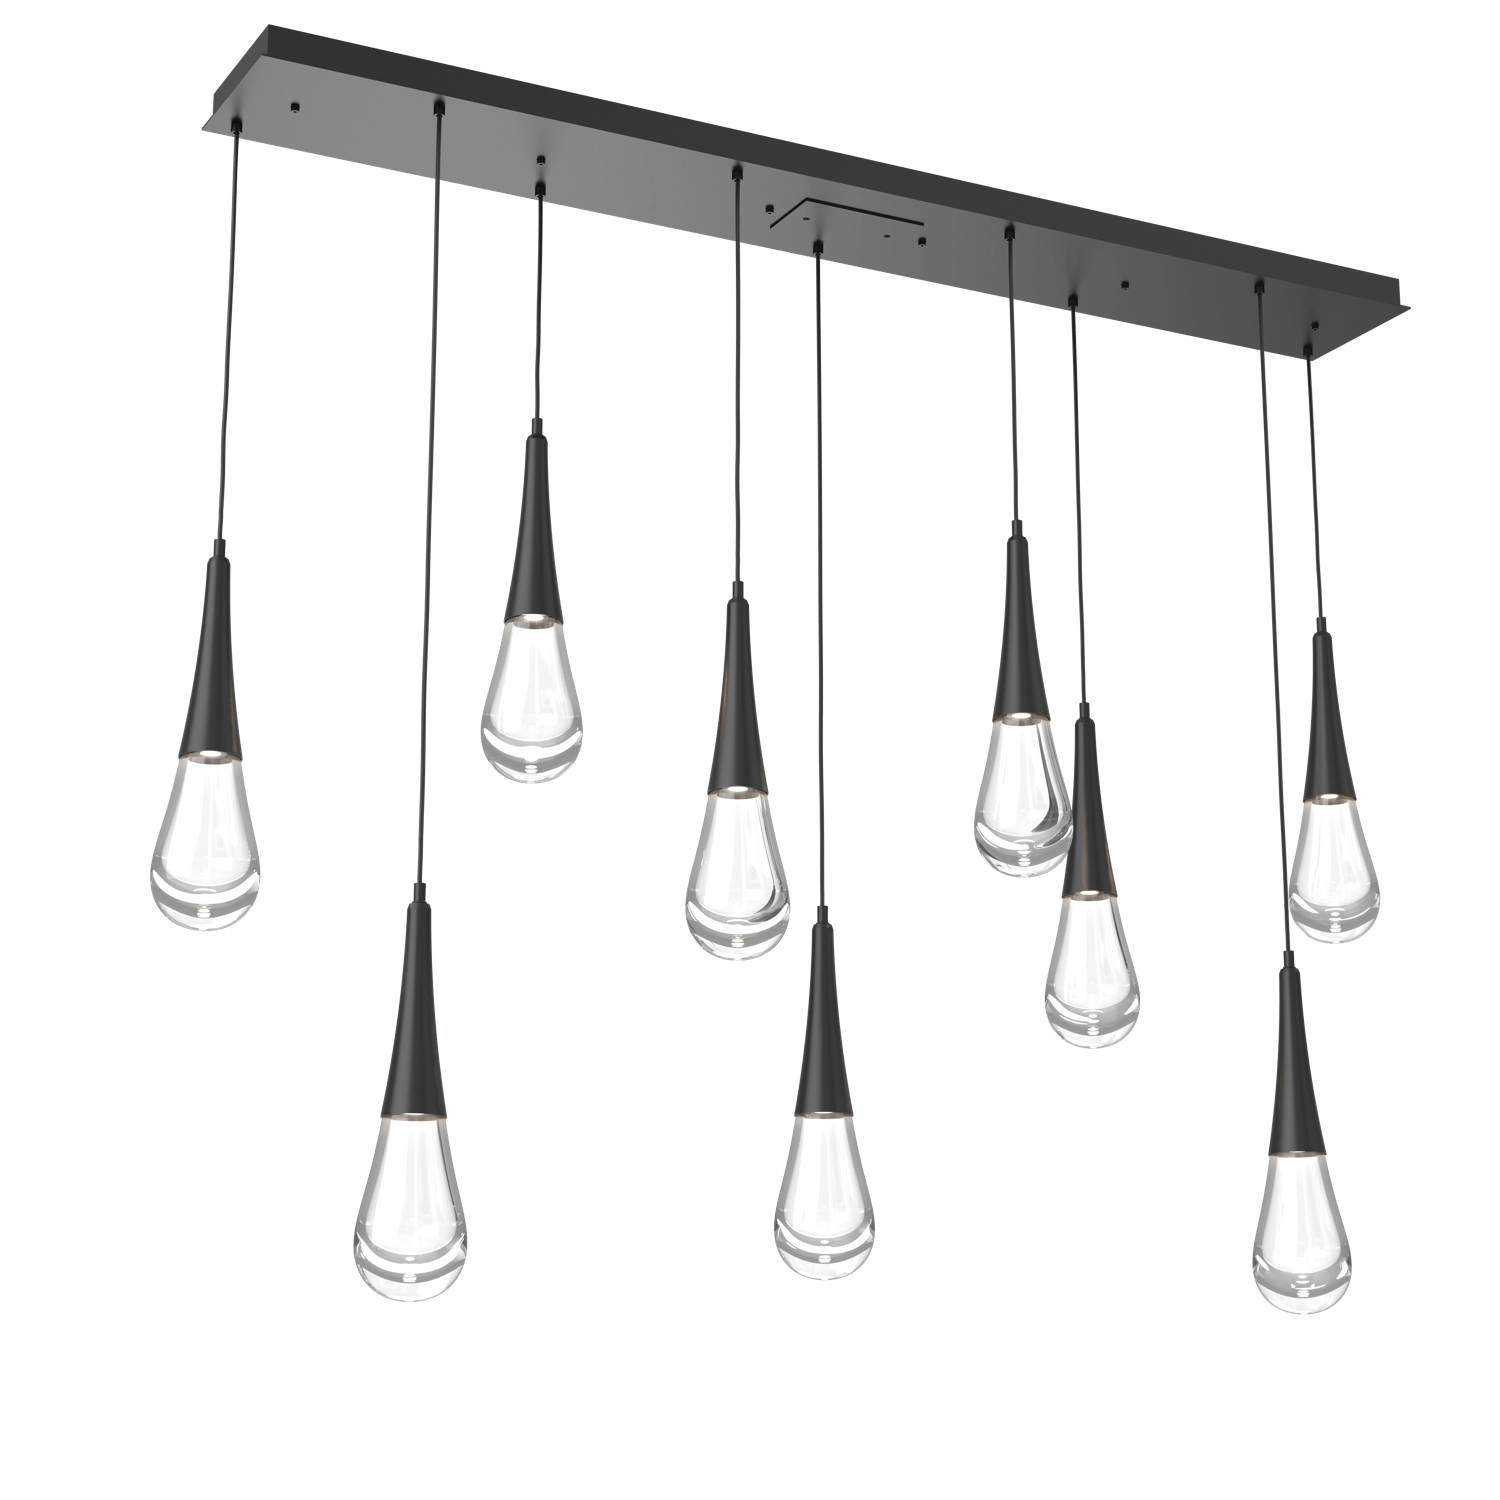 PLB0078-09-MB-Hammerton-Studio-Raindrop-9-light-linear-pendant-chandelier-with-matte-black-finish-and-clear-blown-glass-shades-and-LED-lamping